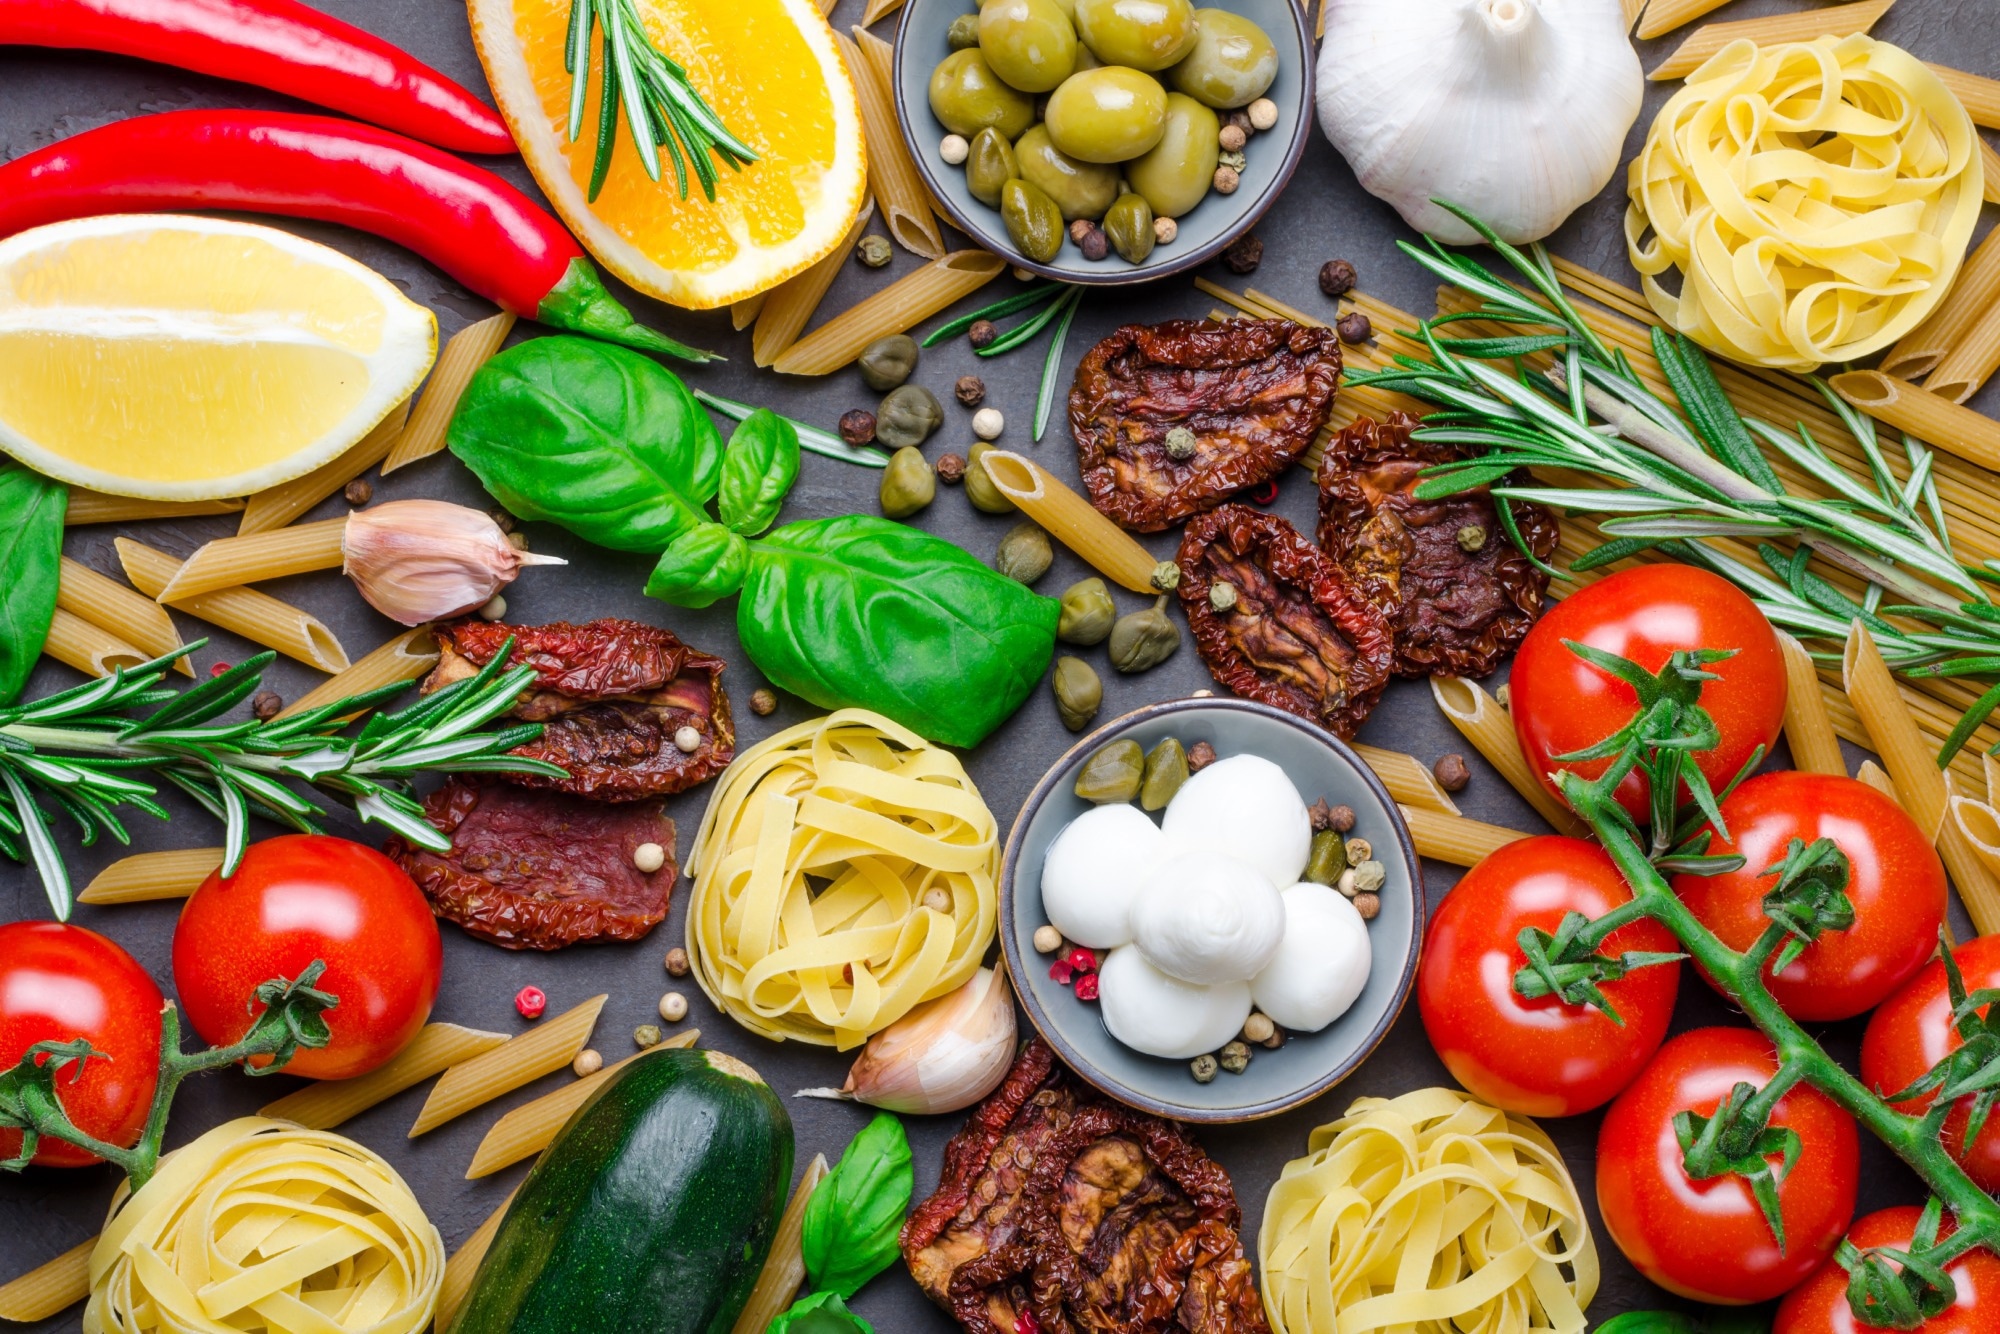 Study: Observational Cross-Sectional Study on Mediterranean Diet and Sperm Parameters. Image Credit: losinstantes / Shutterstock.com